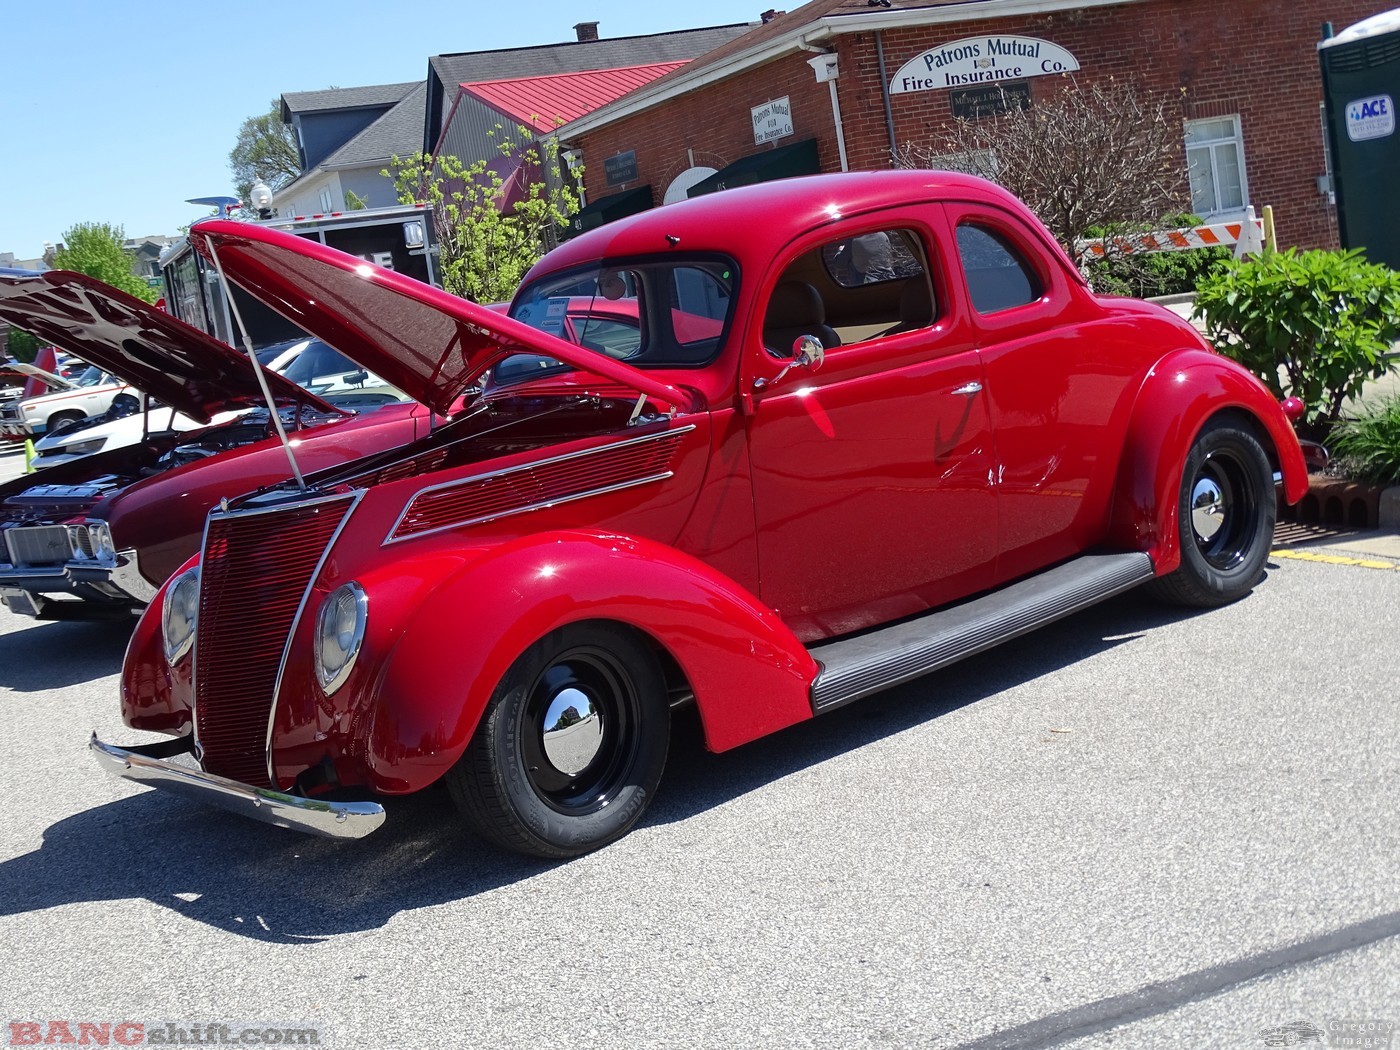 2019 ALS Cruising For A Cure Car Show Coverage: Oldies But Goodies! All Pre-55 Gallery!